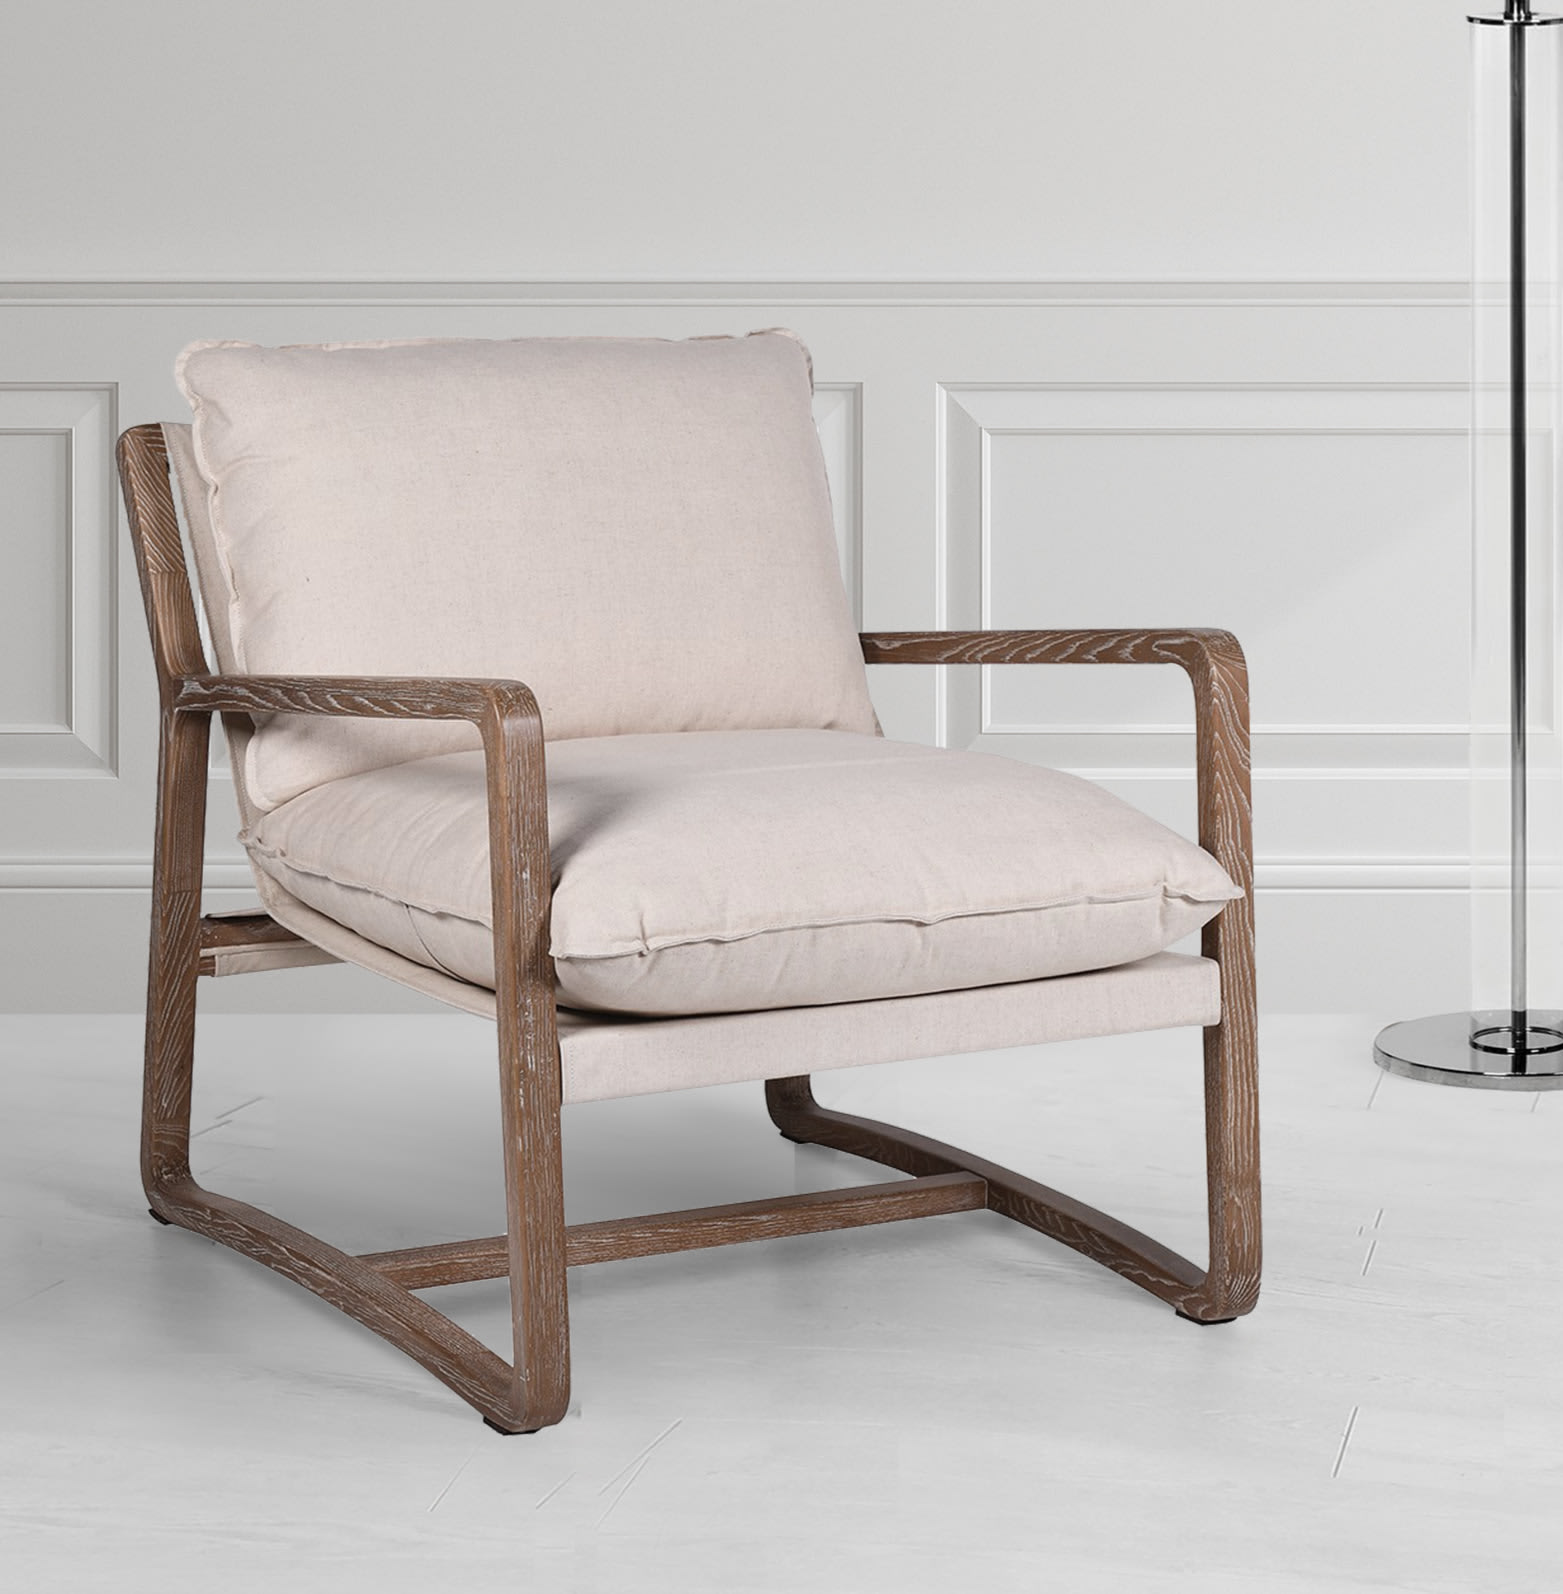 Linen Upholstered Armchair with Wooden Frame.